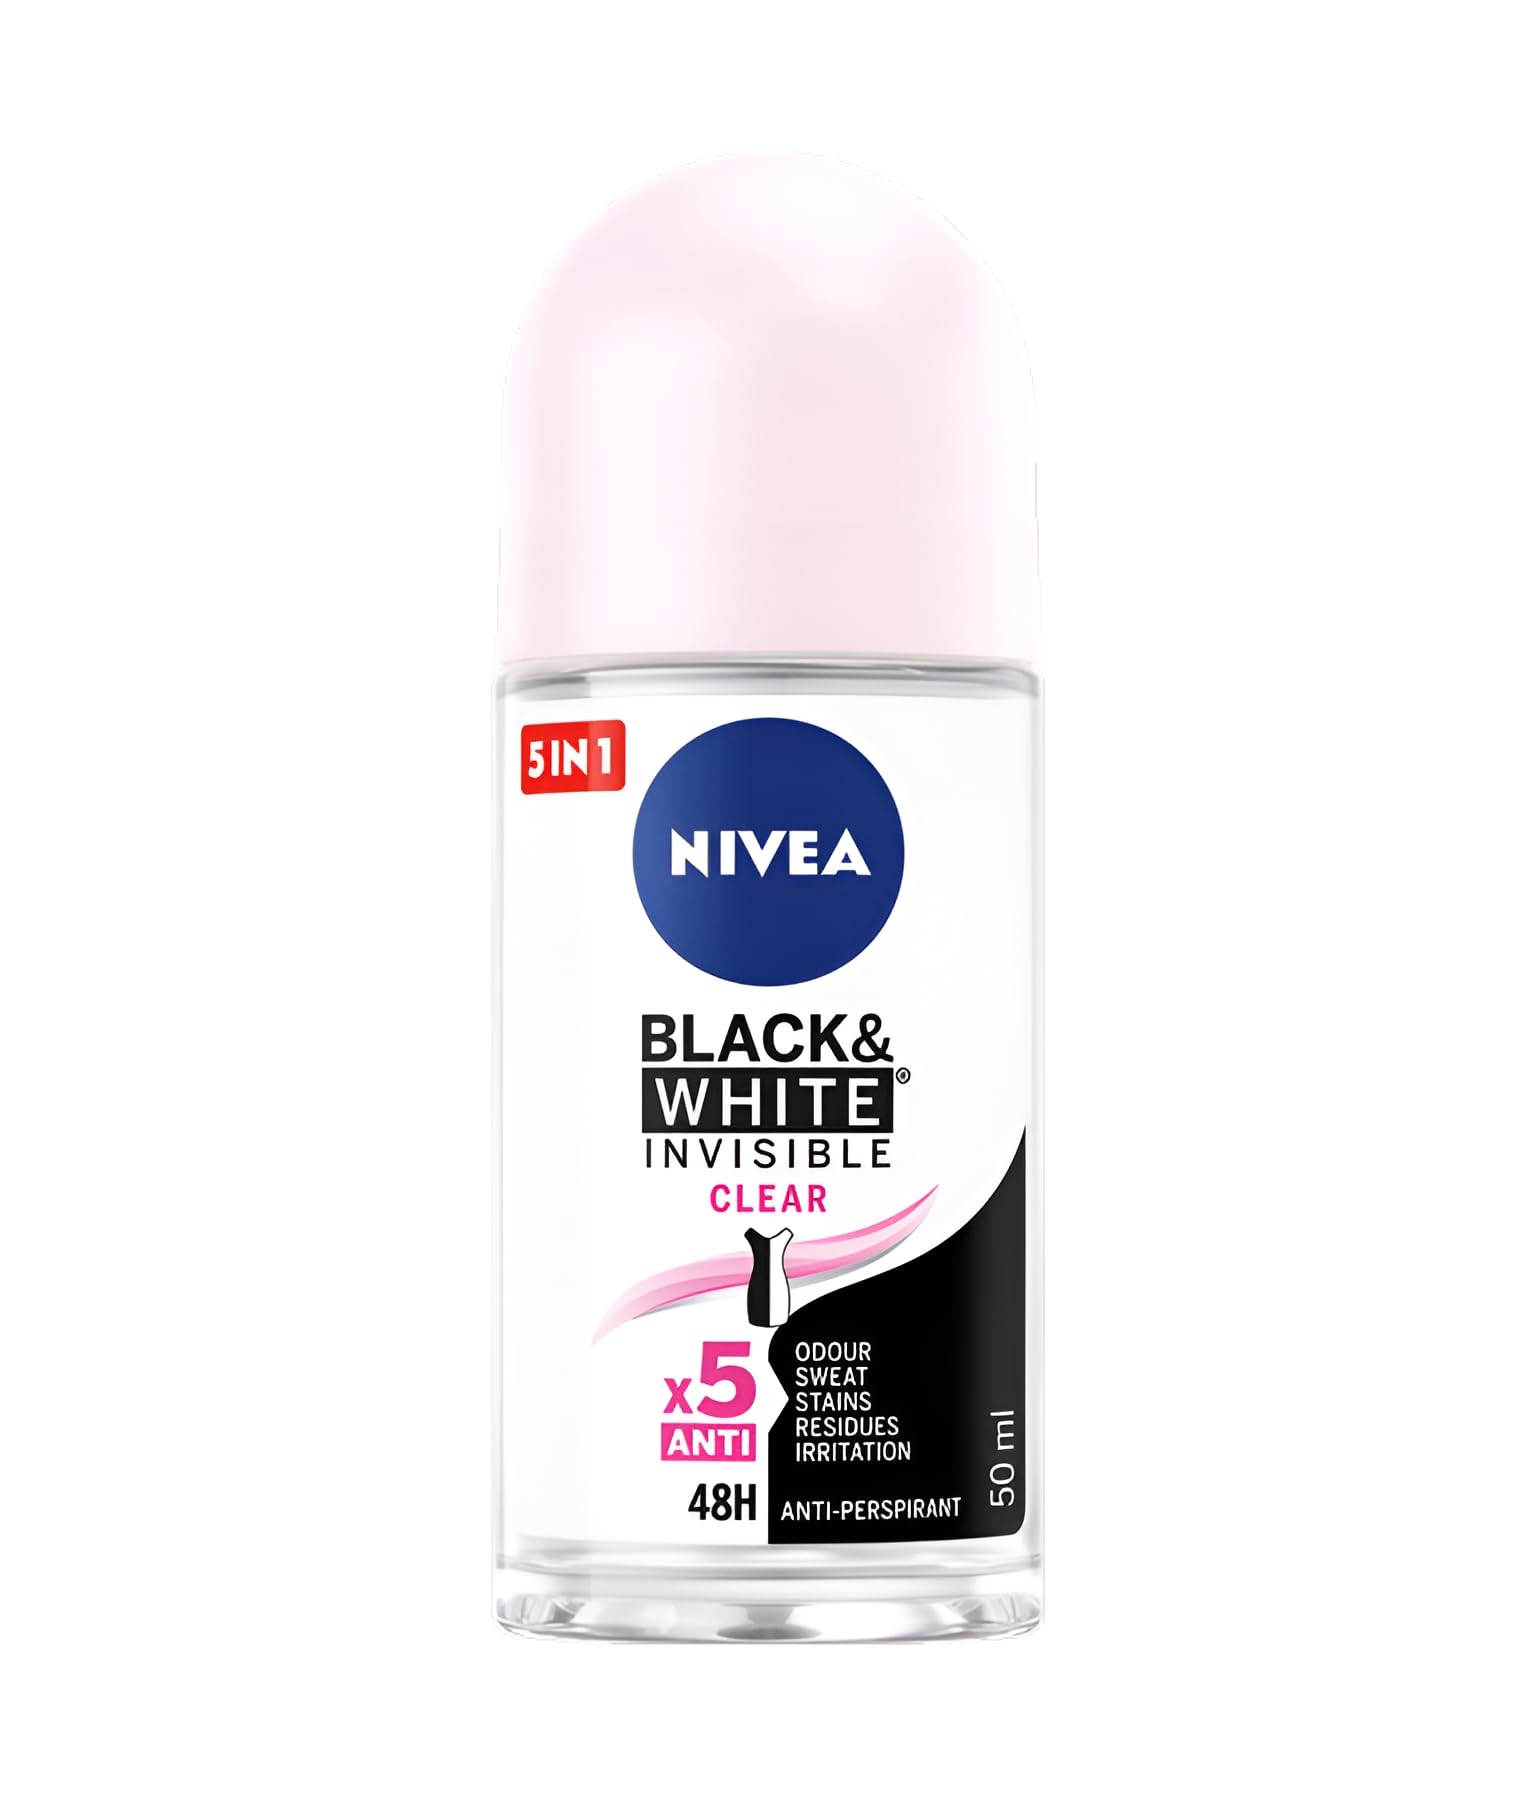 Nivea Roll-on Invisible Black & White Clear Anti-perspirant Care for Every Skin Type 48 Hours Sweat Protection and Delicate Care Alcohol-free, 50ml Pack of 6